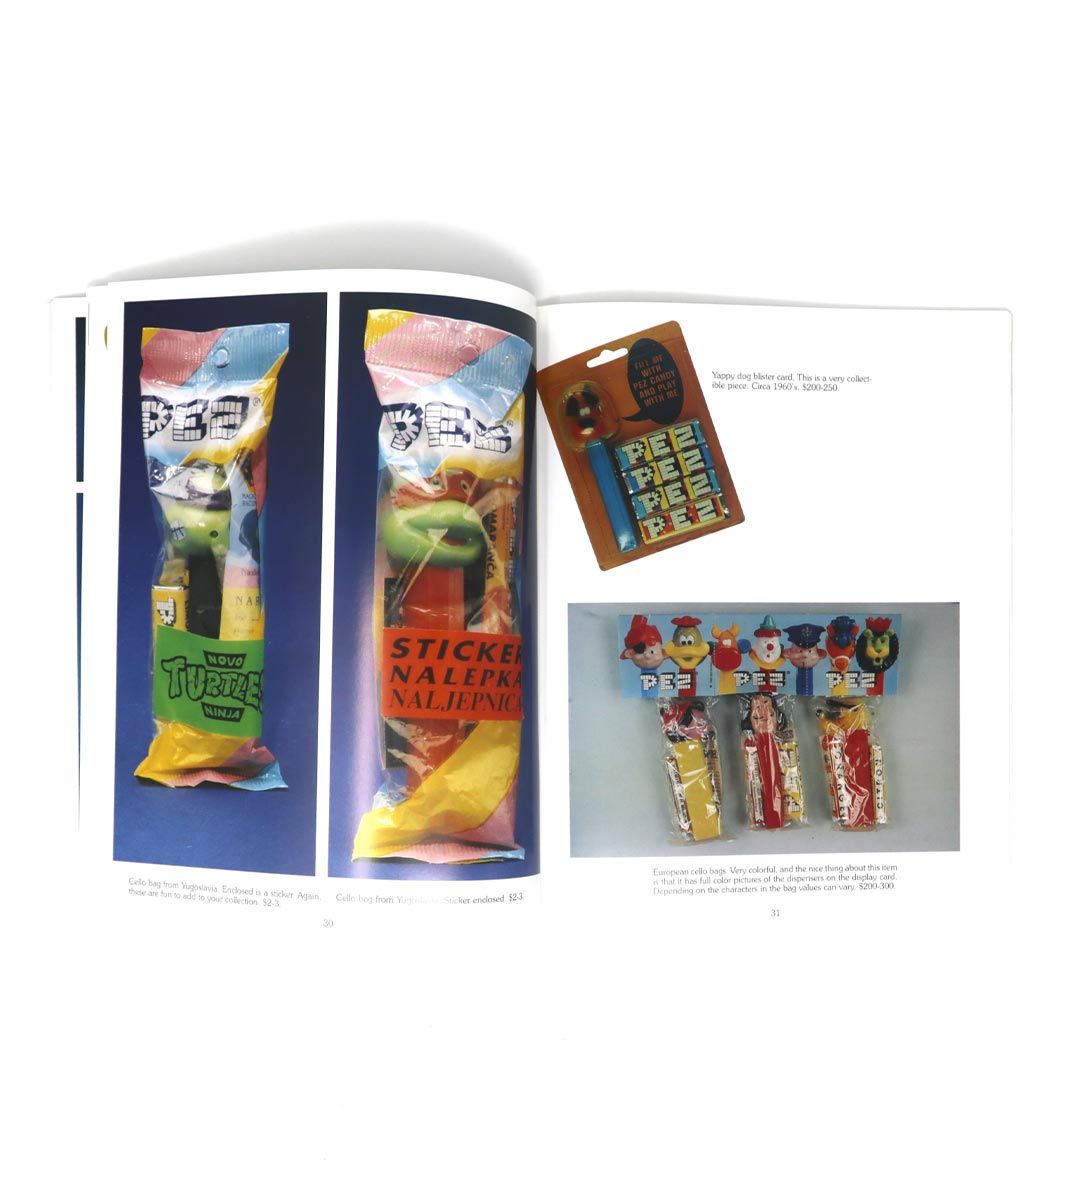 More Pez For Collectors - A Schiffer Book for Collectors